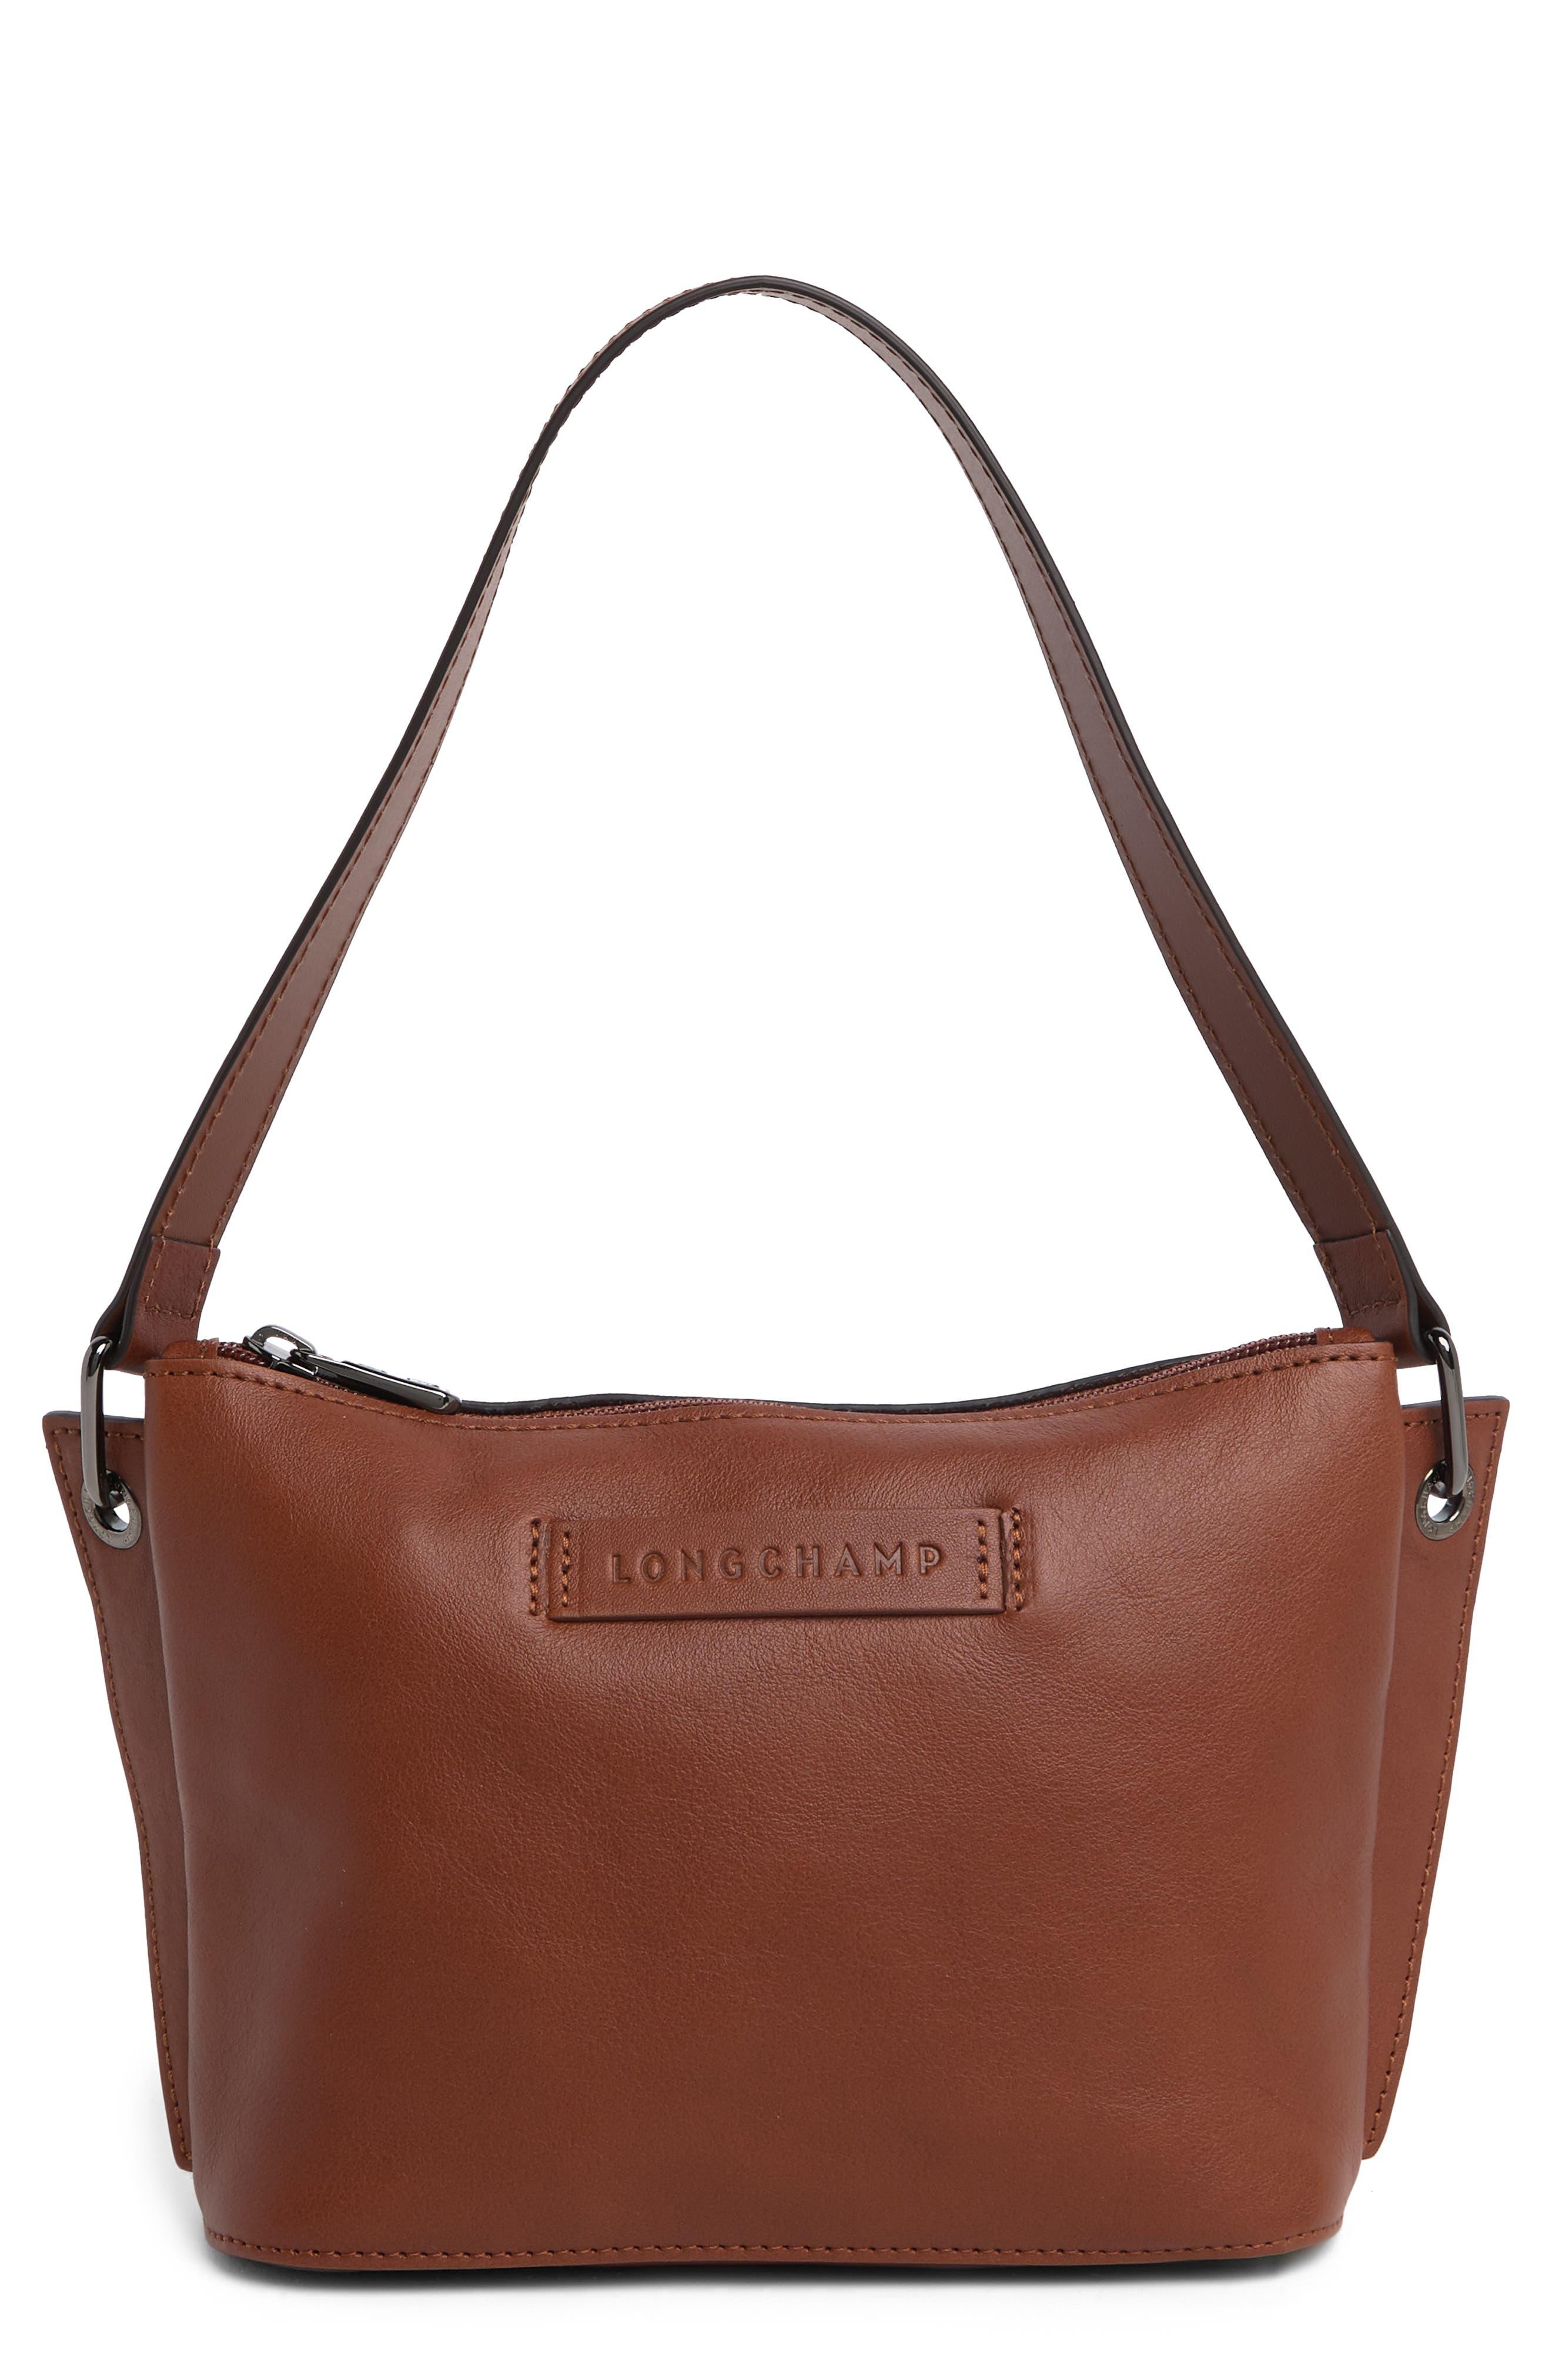 Longchamp 3d Extra Small Shoulder Bag in Brown | Lyst